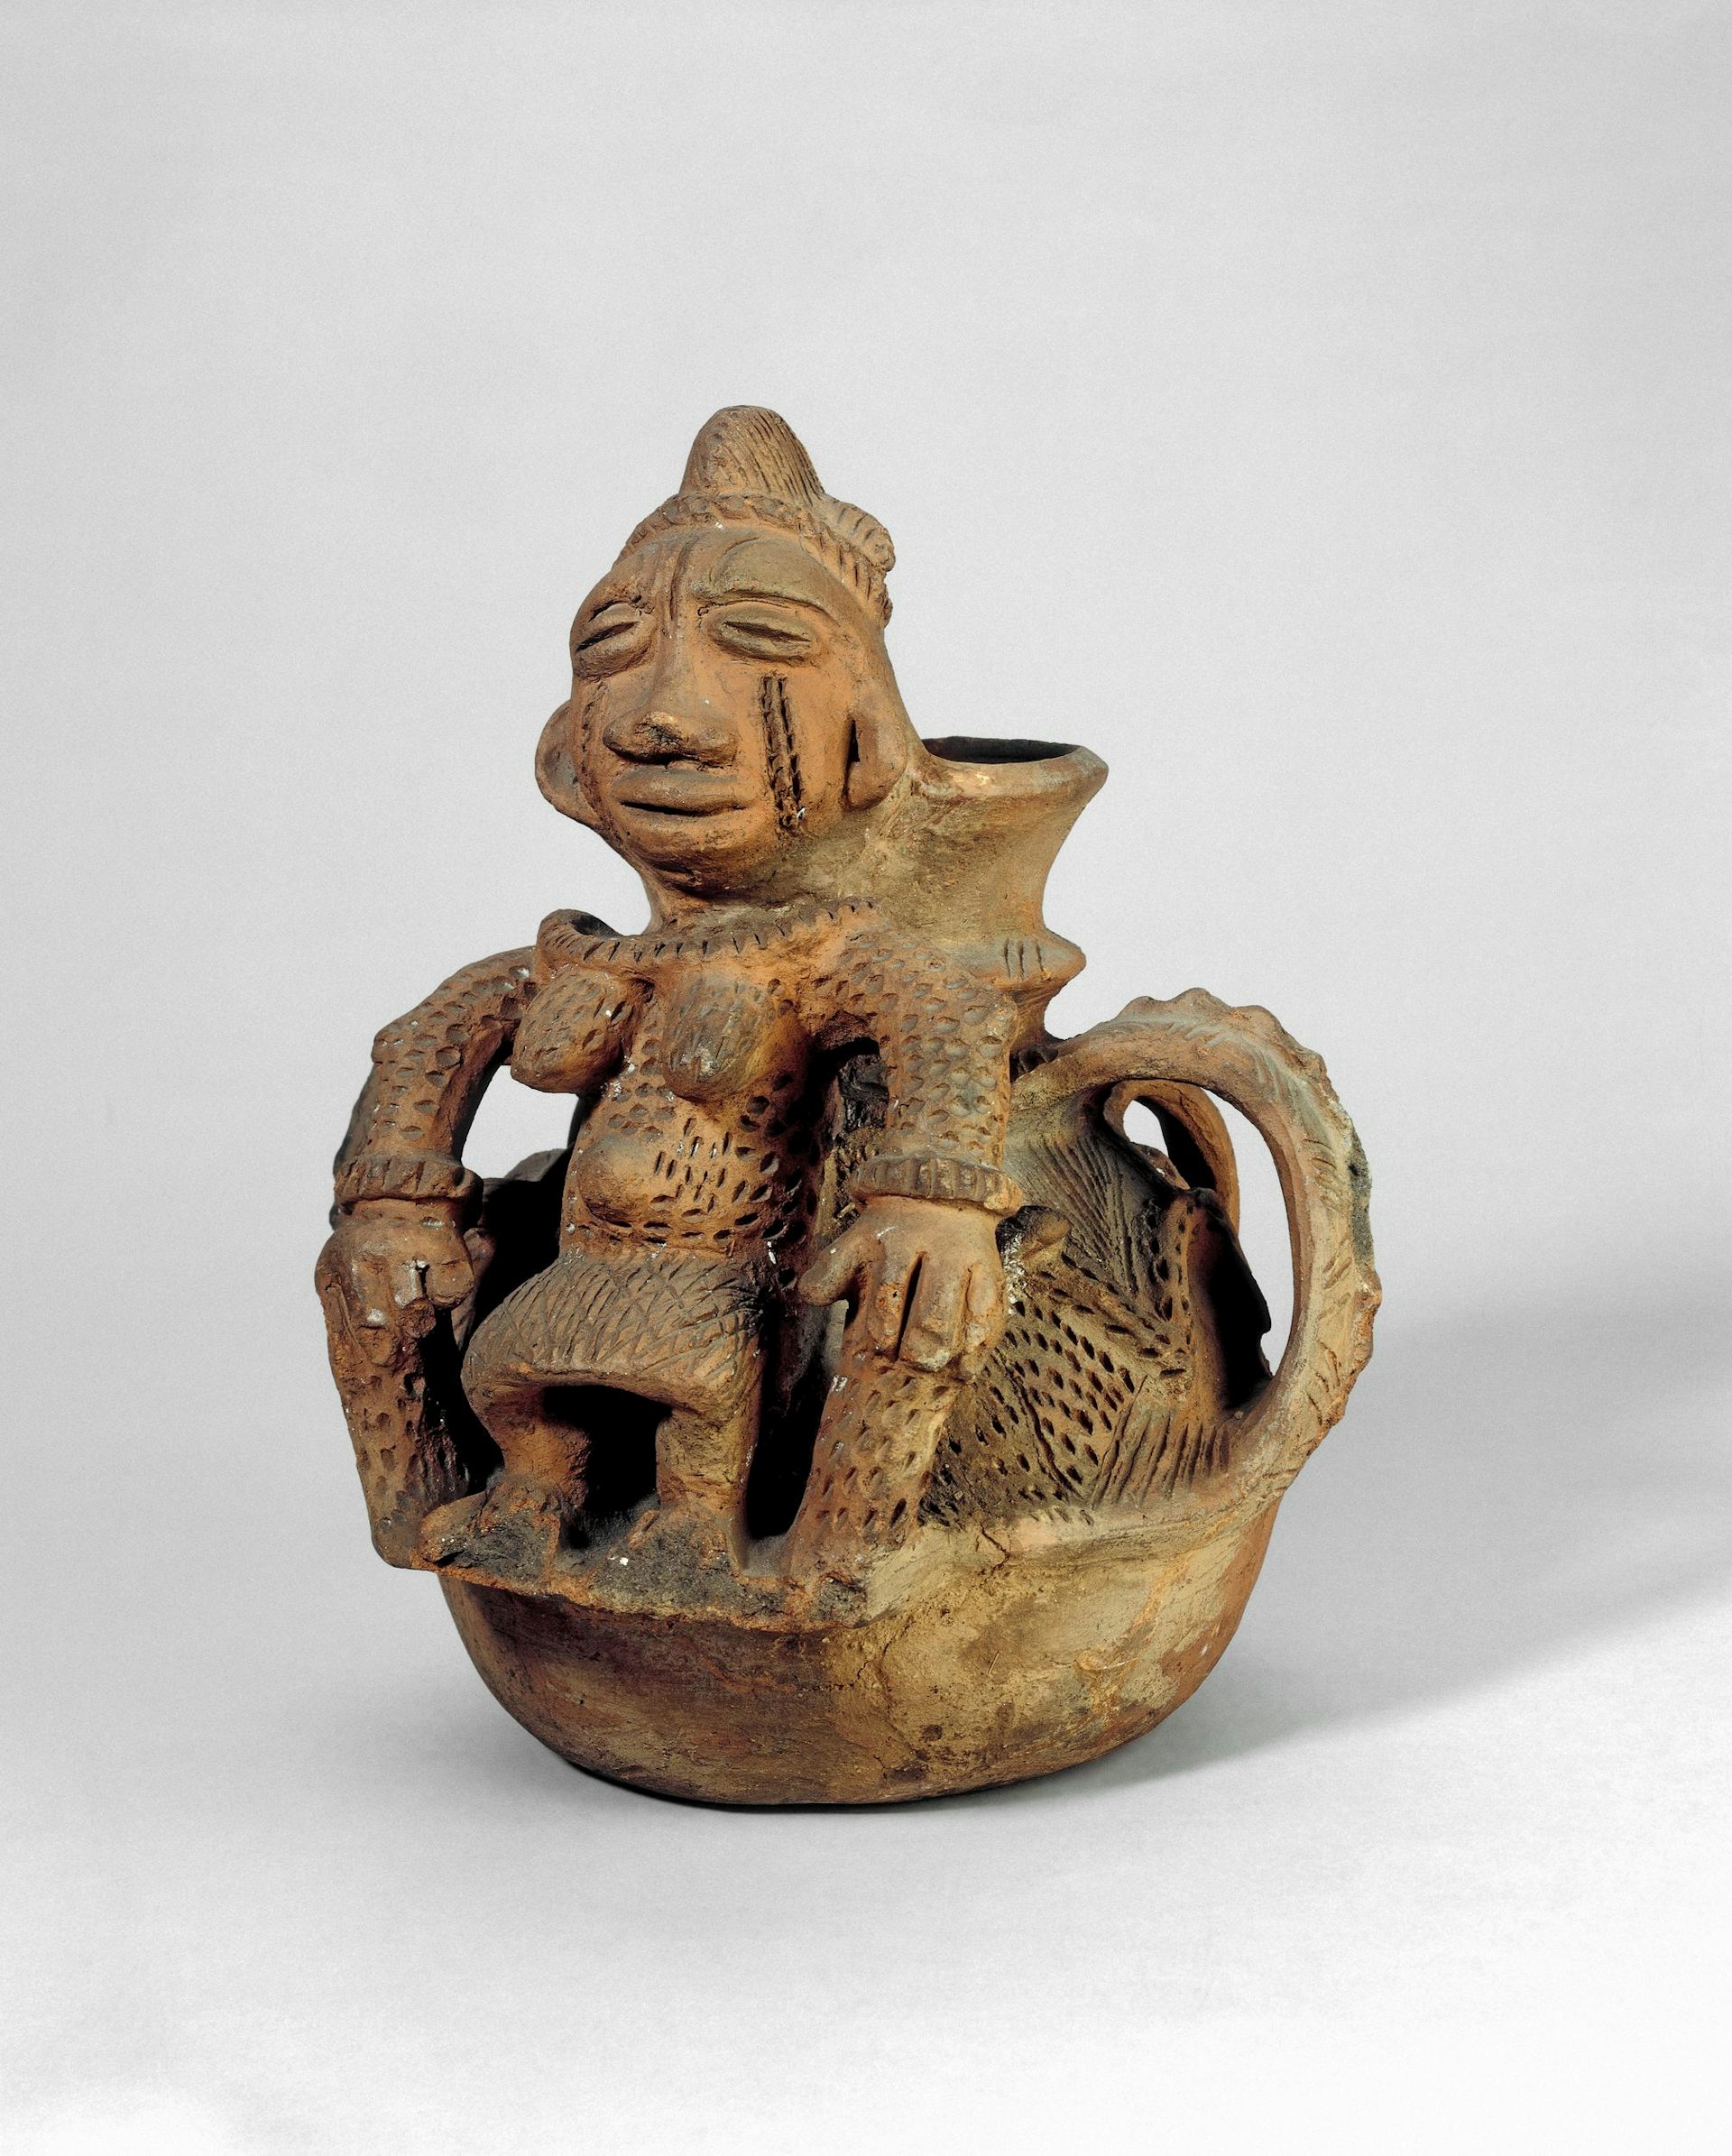 A pottery for Olokun, by Edo artist (16th to 19th century)